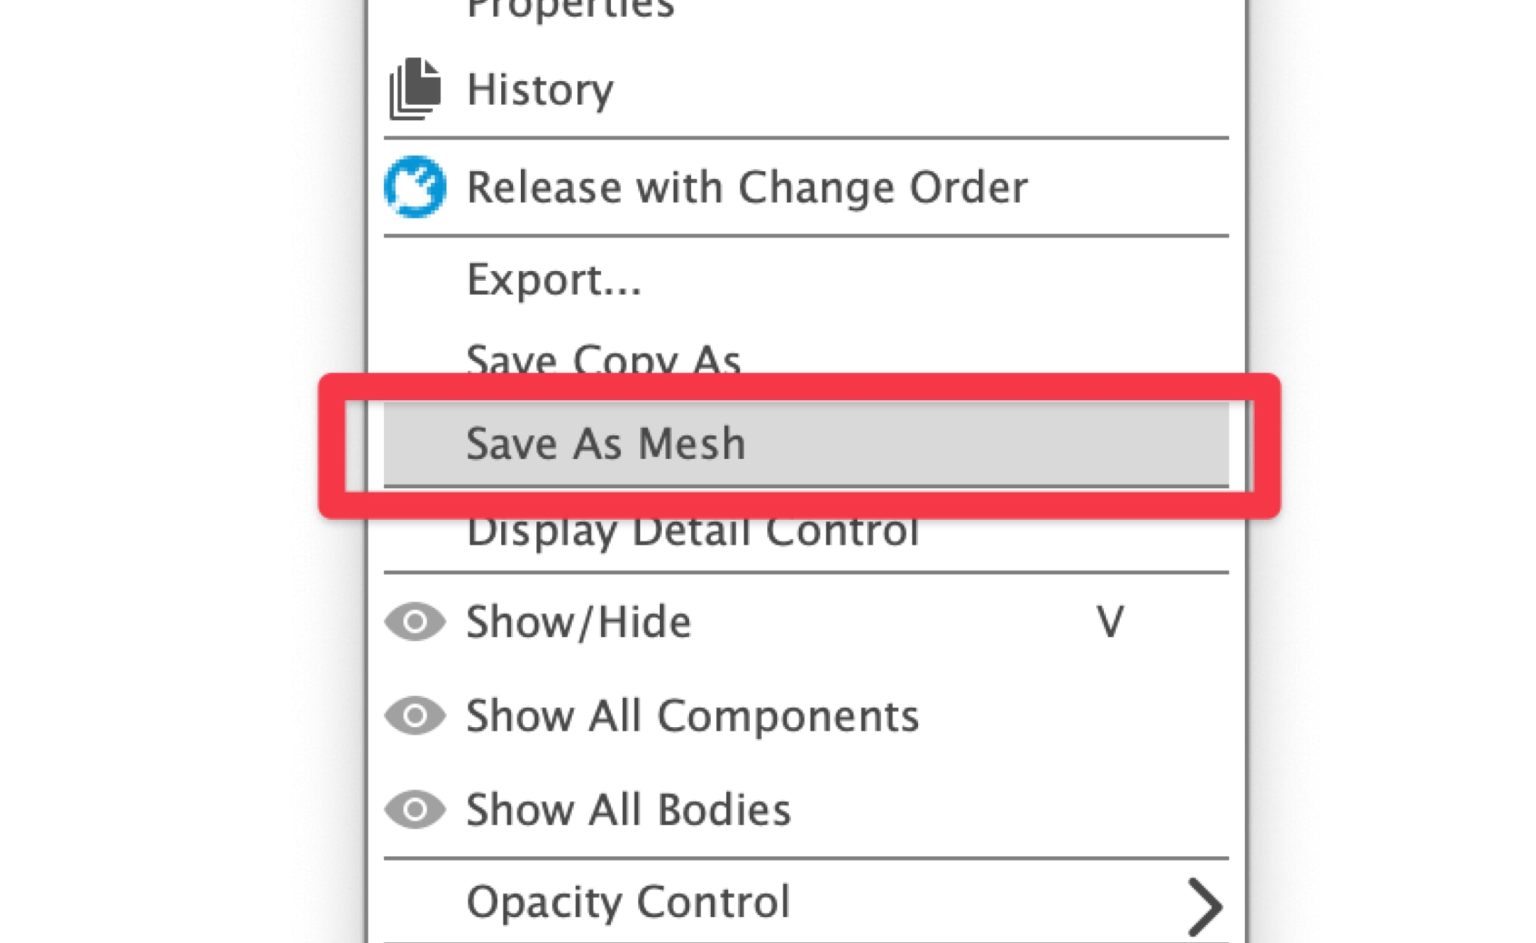 Save as Mesh in Autodesk Fusion 360